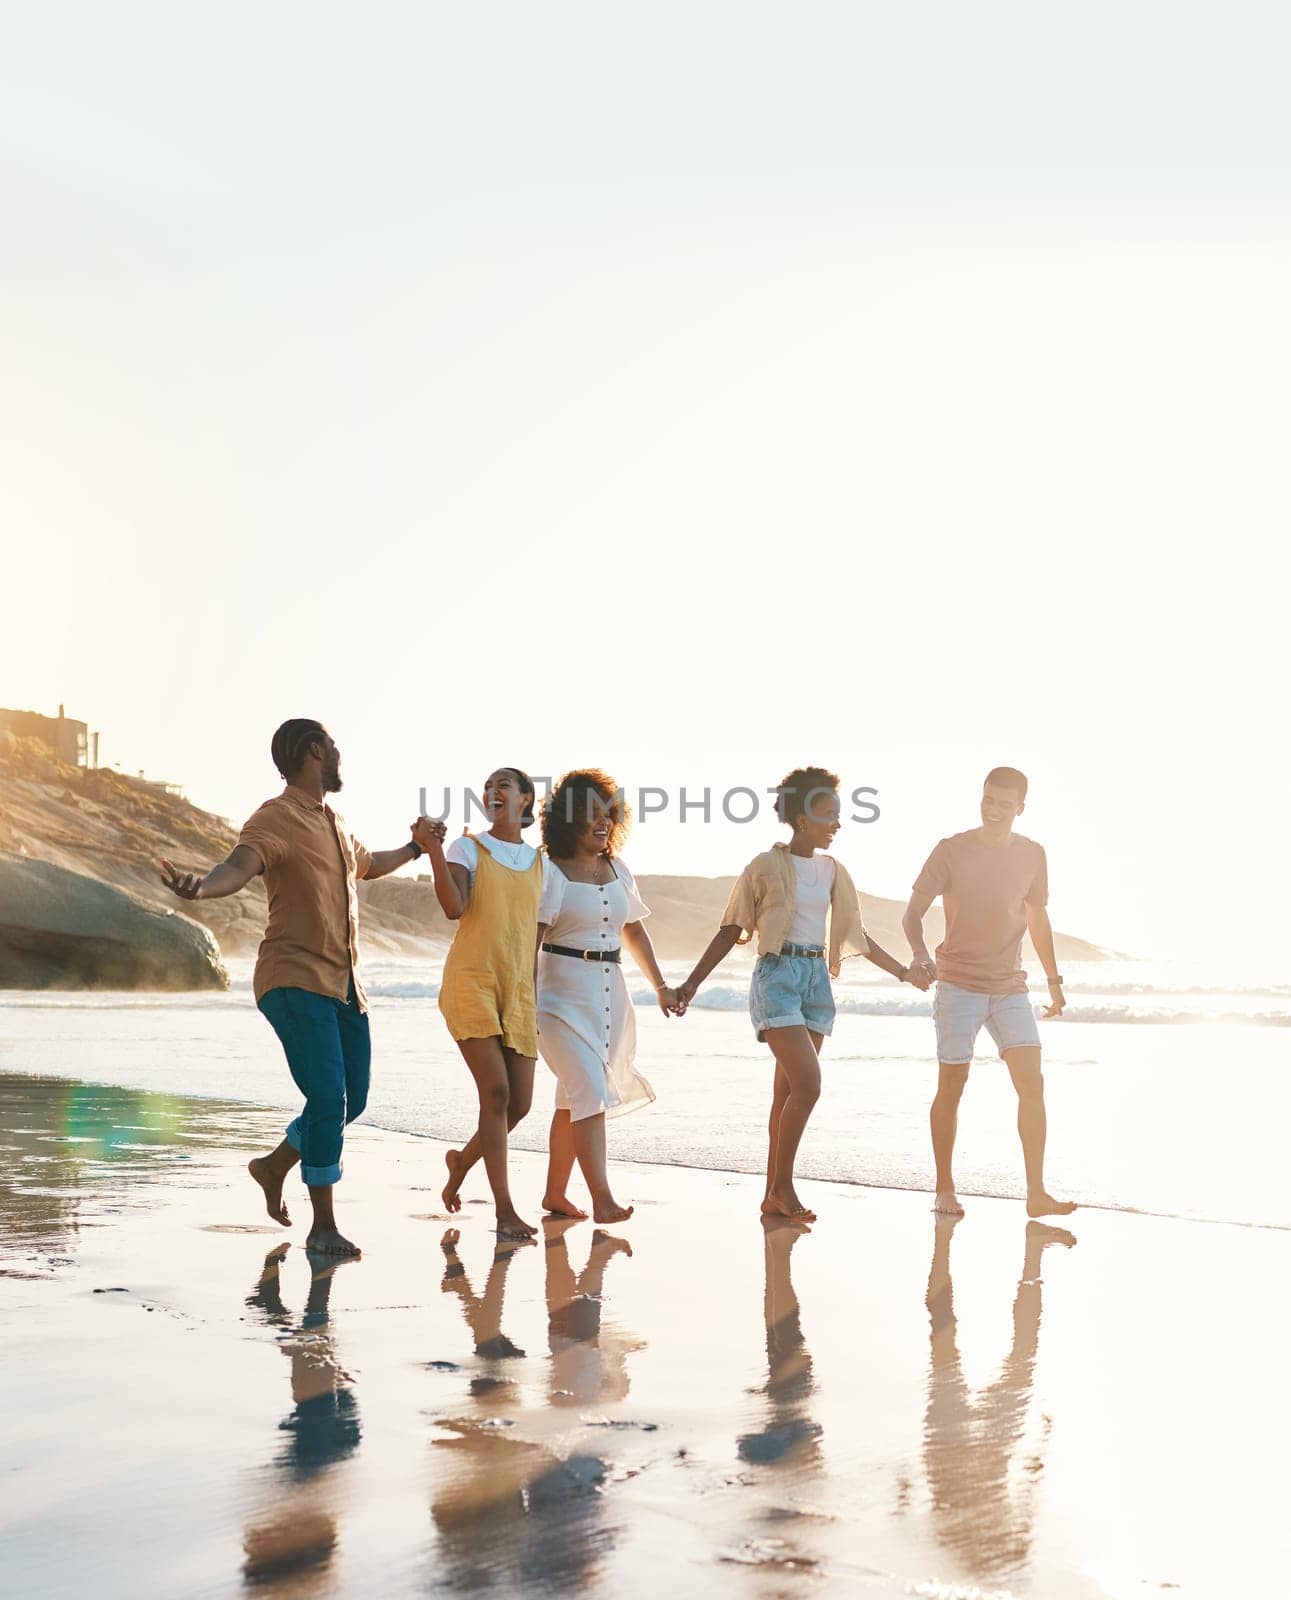 Summer, holding hands and travel with friends at beach for freedom, support and sunset. Wellness, energy and happy with group of people walking by the sea for peace, adventure and vacation mockup.